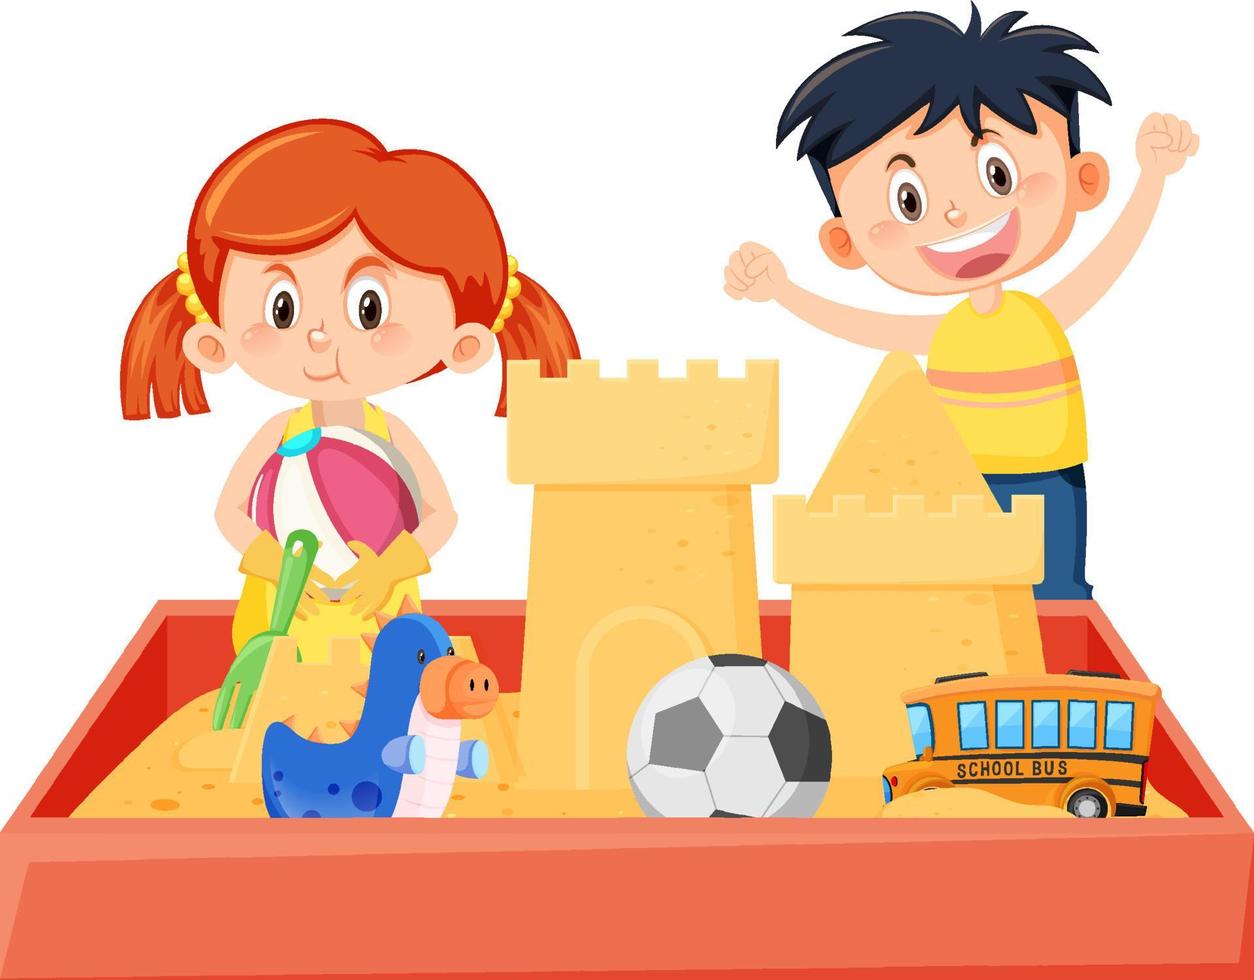 Children playing in the sand pit vector